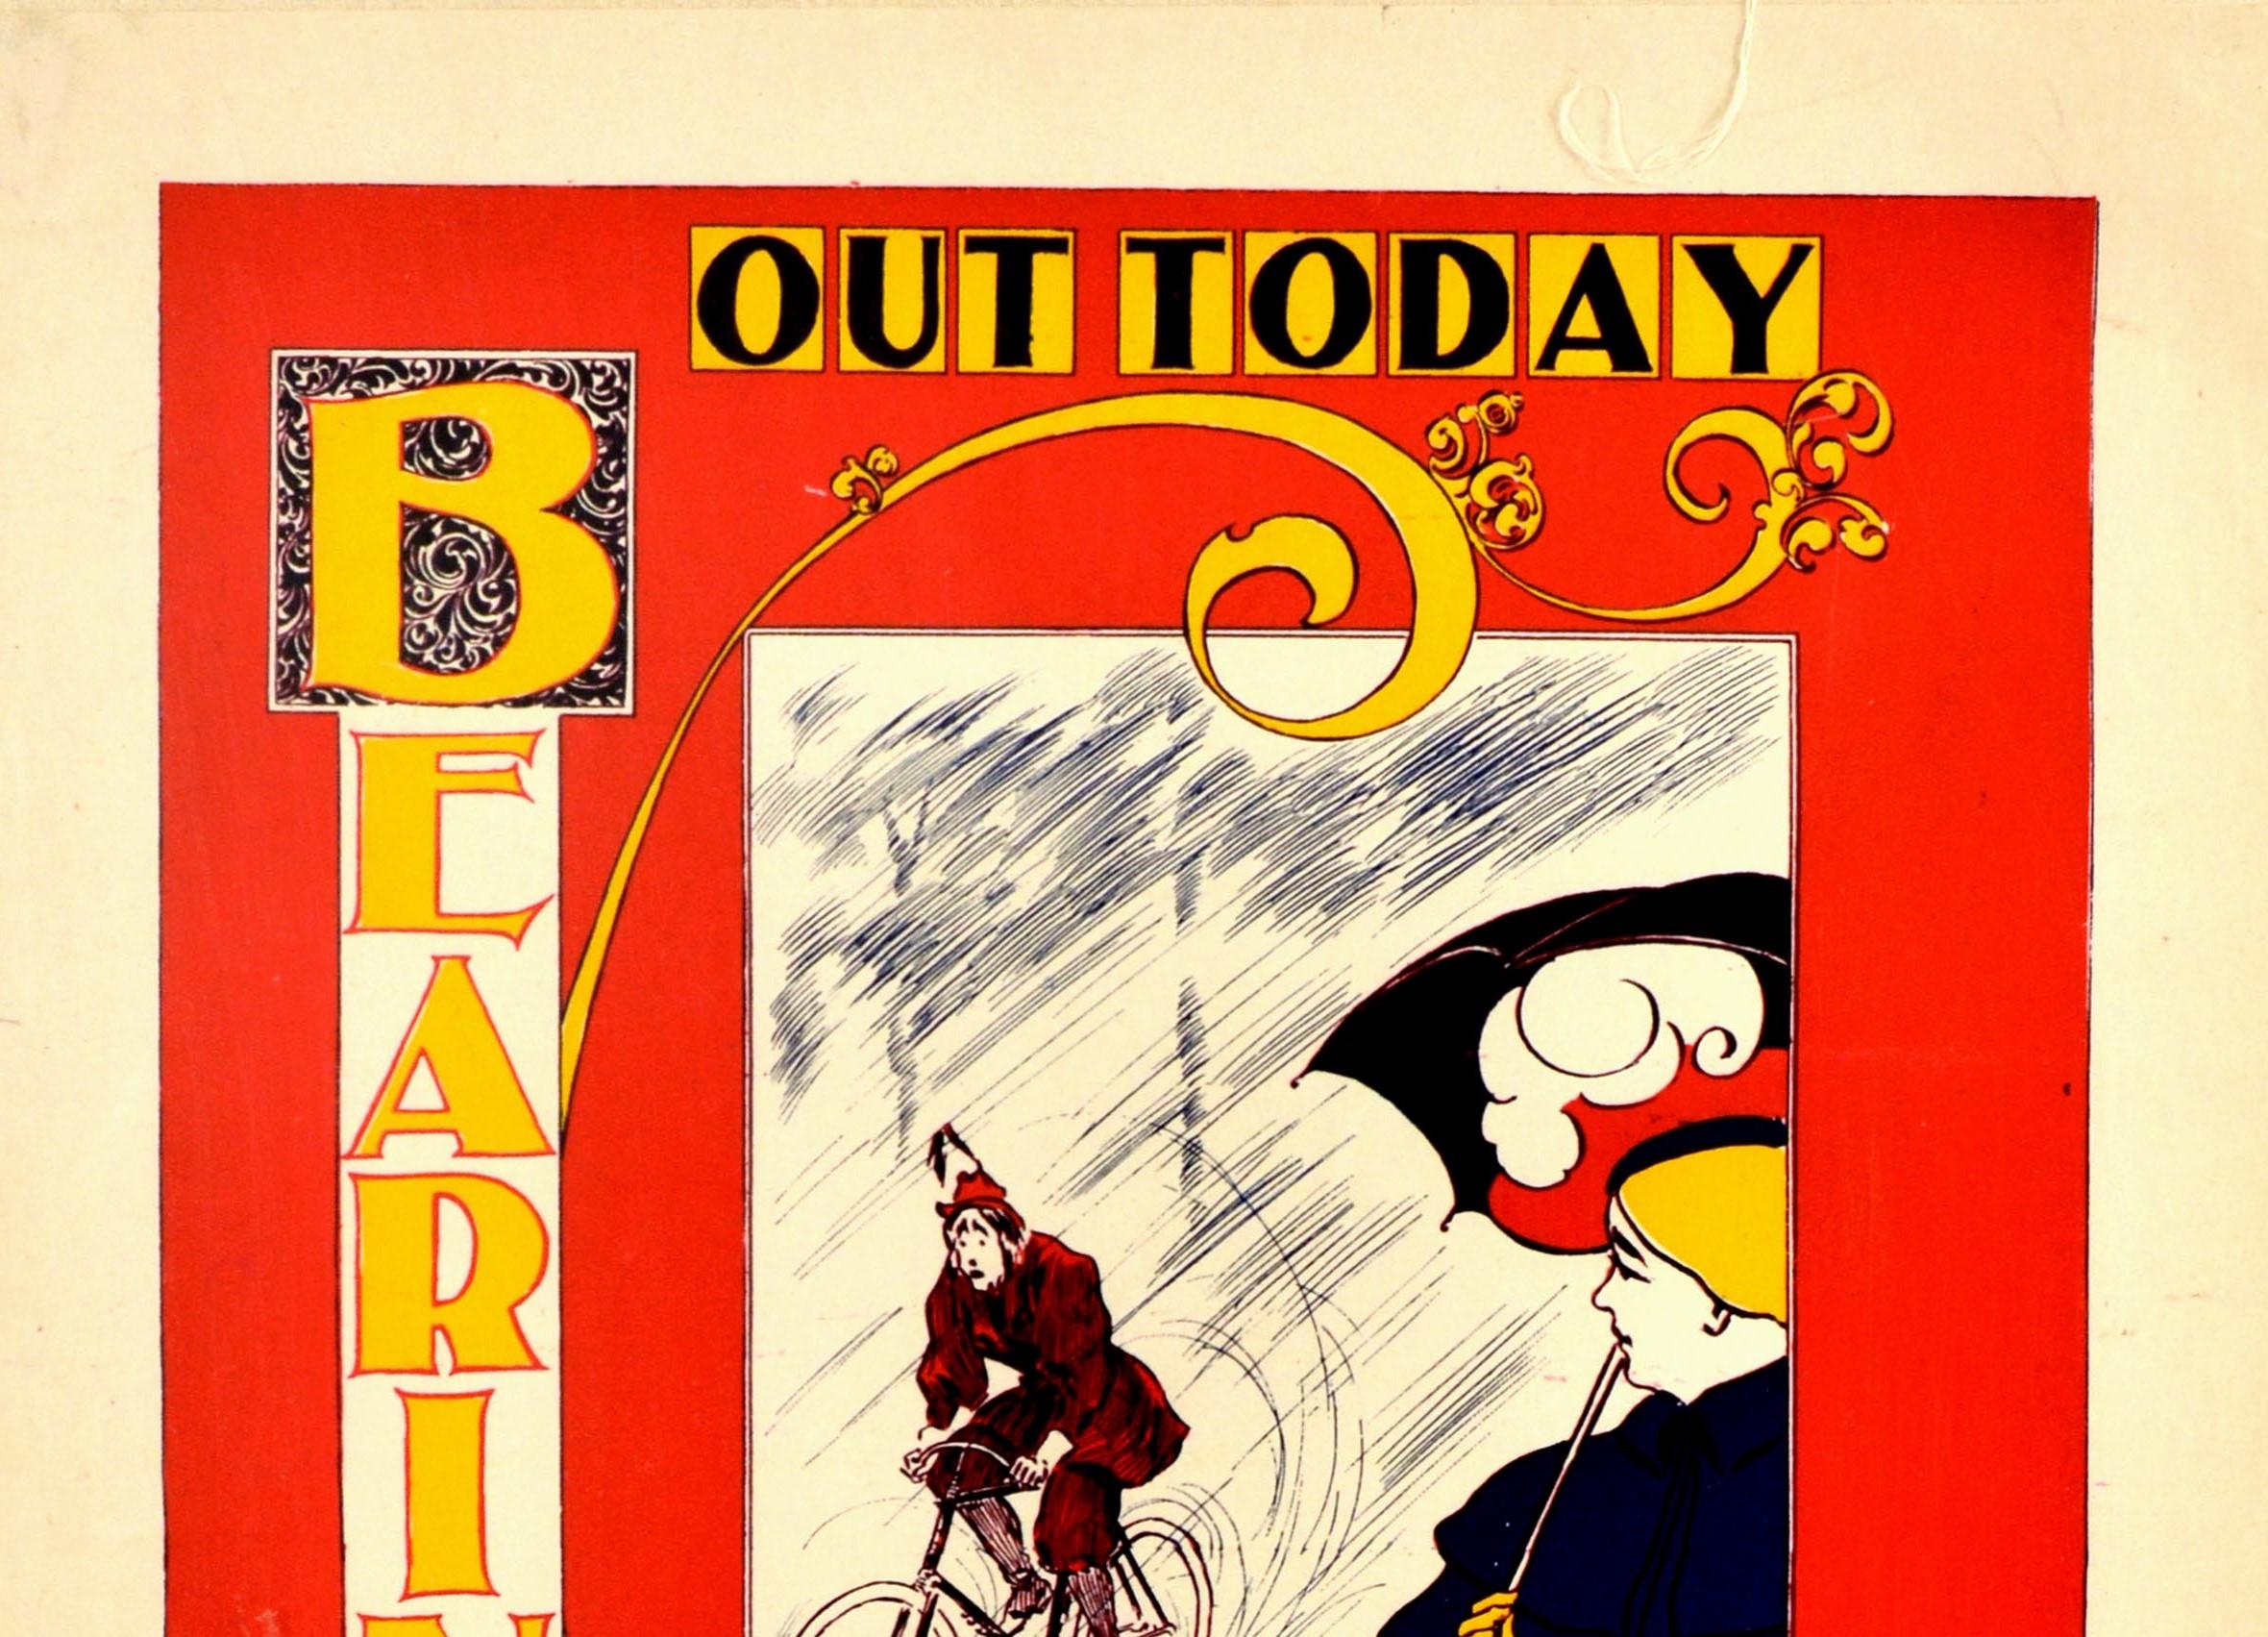 Original antique advertising poster for a popular cycling magazine Bearings featuring a great Art Nouveau style design by the American artist Charles Arthur Cox depicting a lady in fashionable dress standing on the side with an umbrella looking